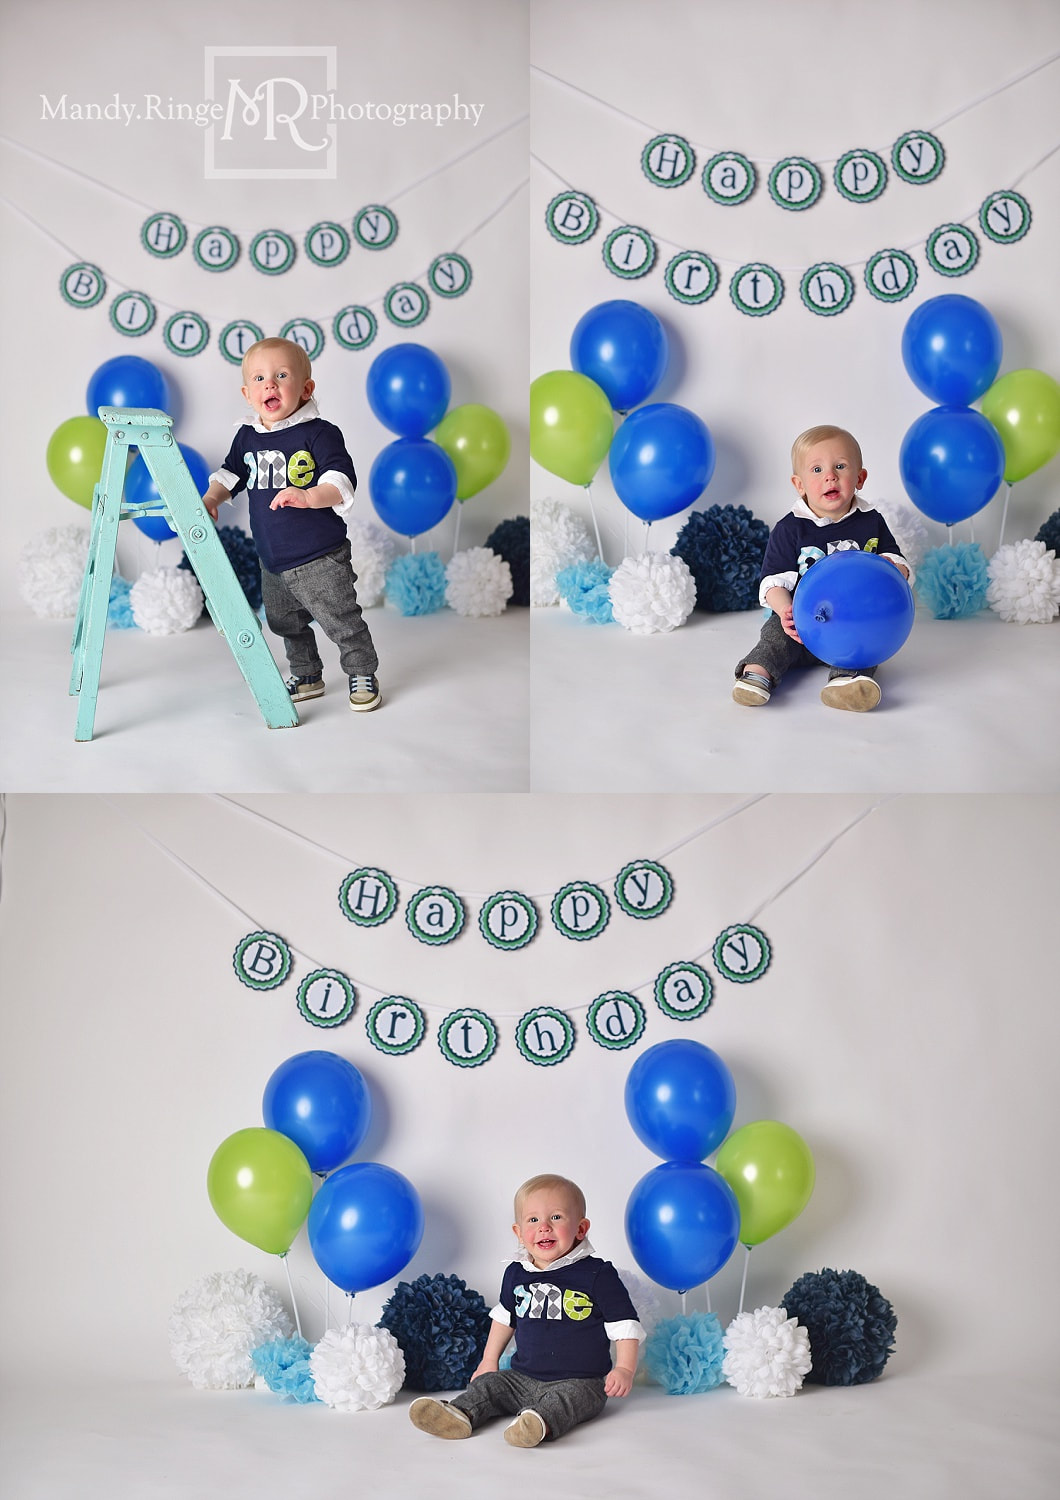 Baby boy first birthday portraits // one year old milestone, blue, green, white, navy, balloons // by Mandy Ringe Photography // St. Charles, IL Photographer